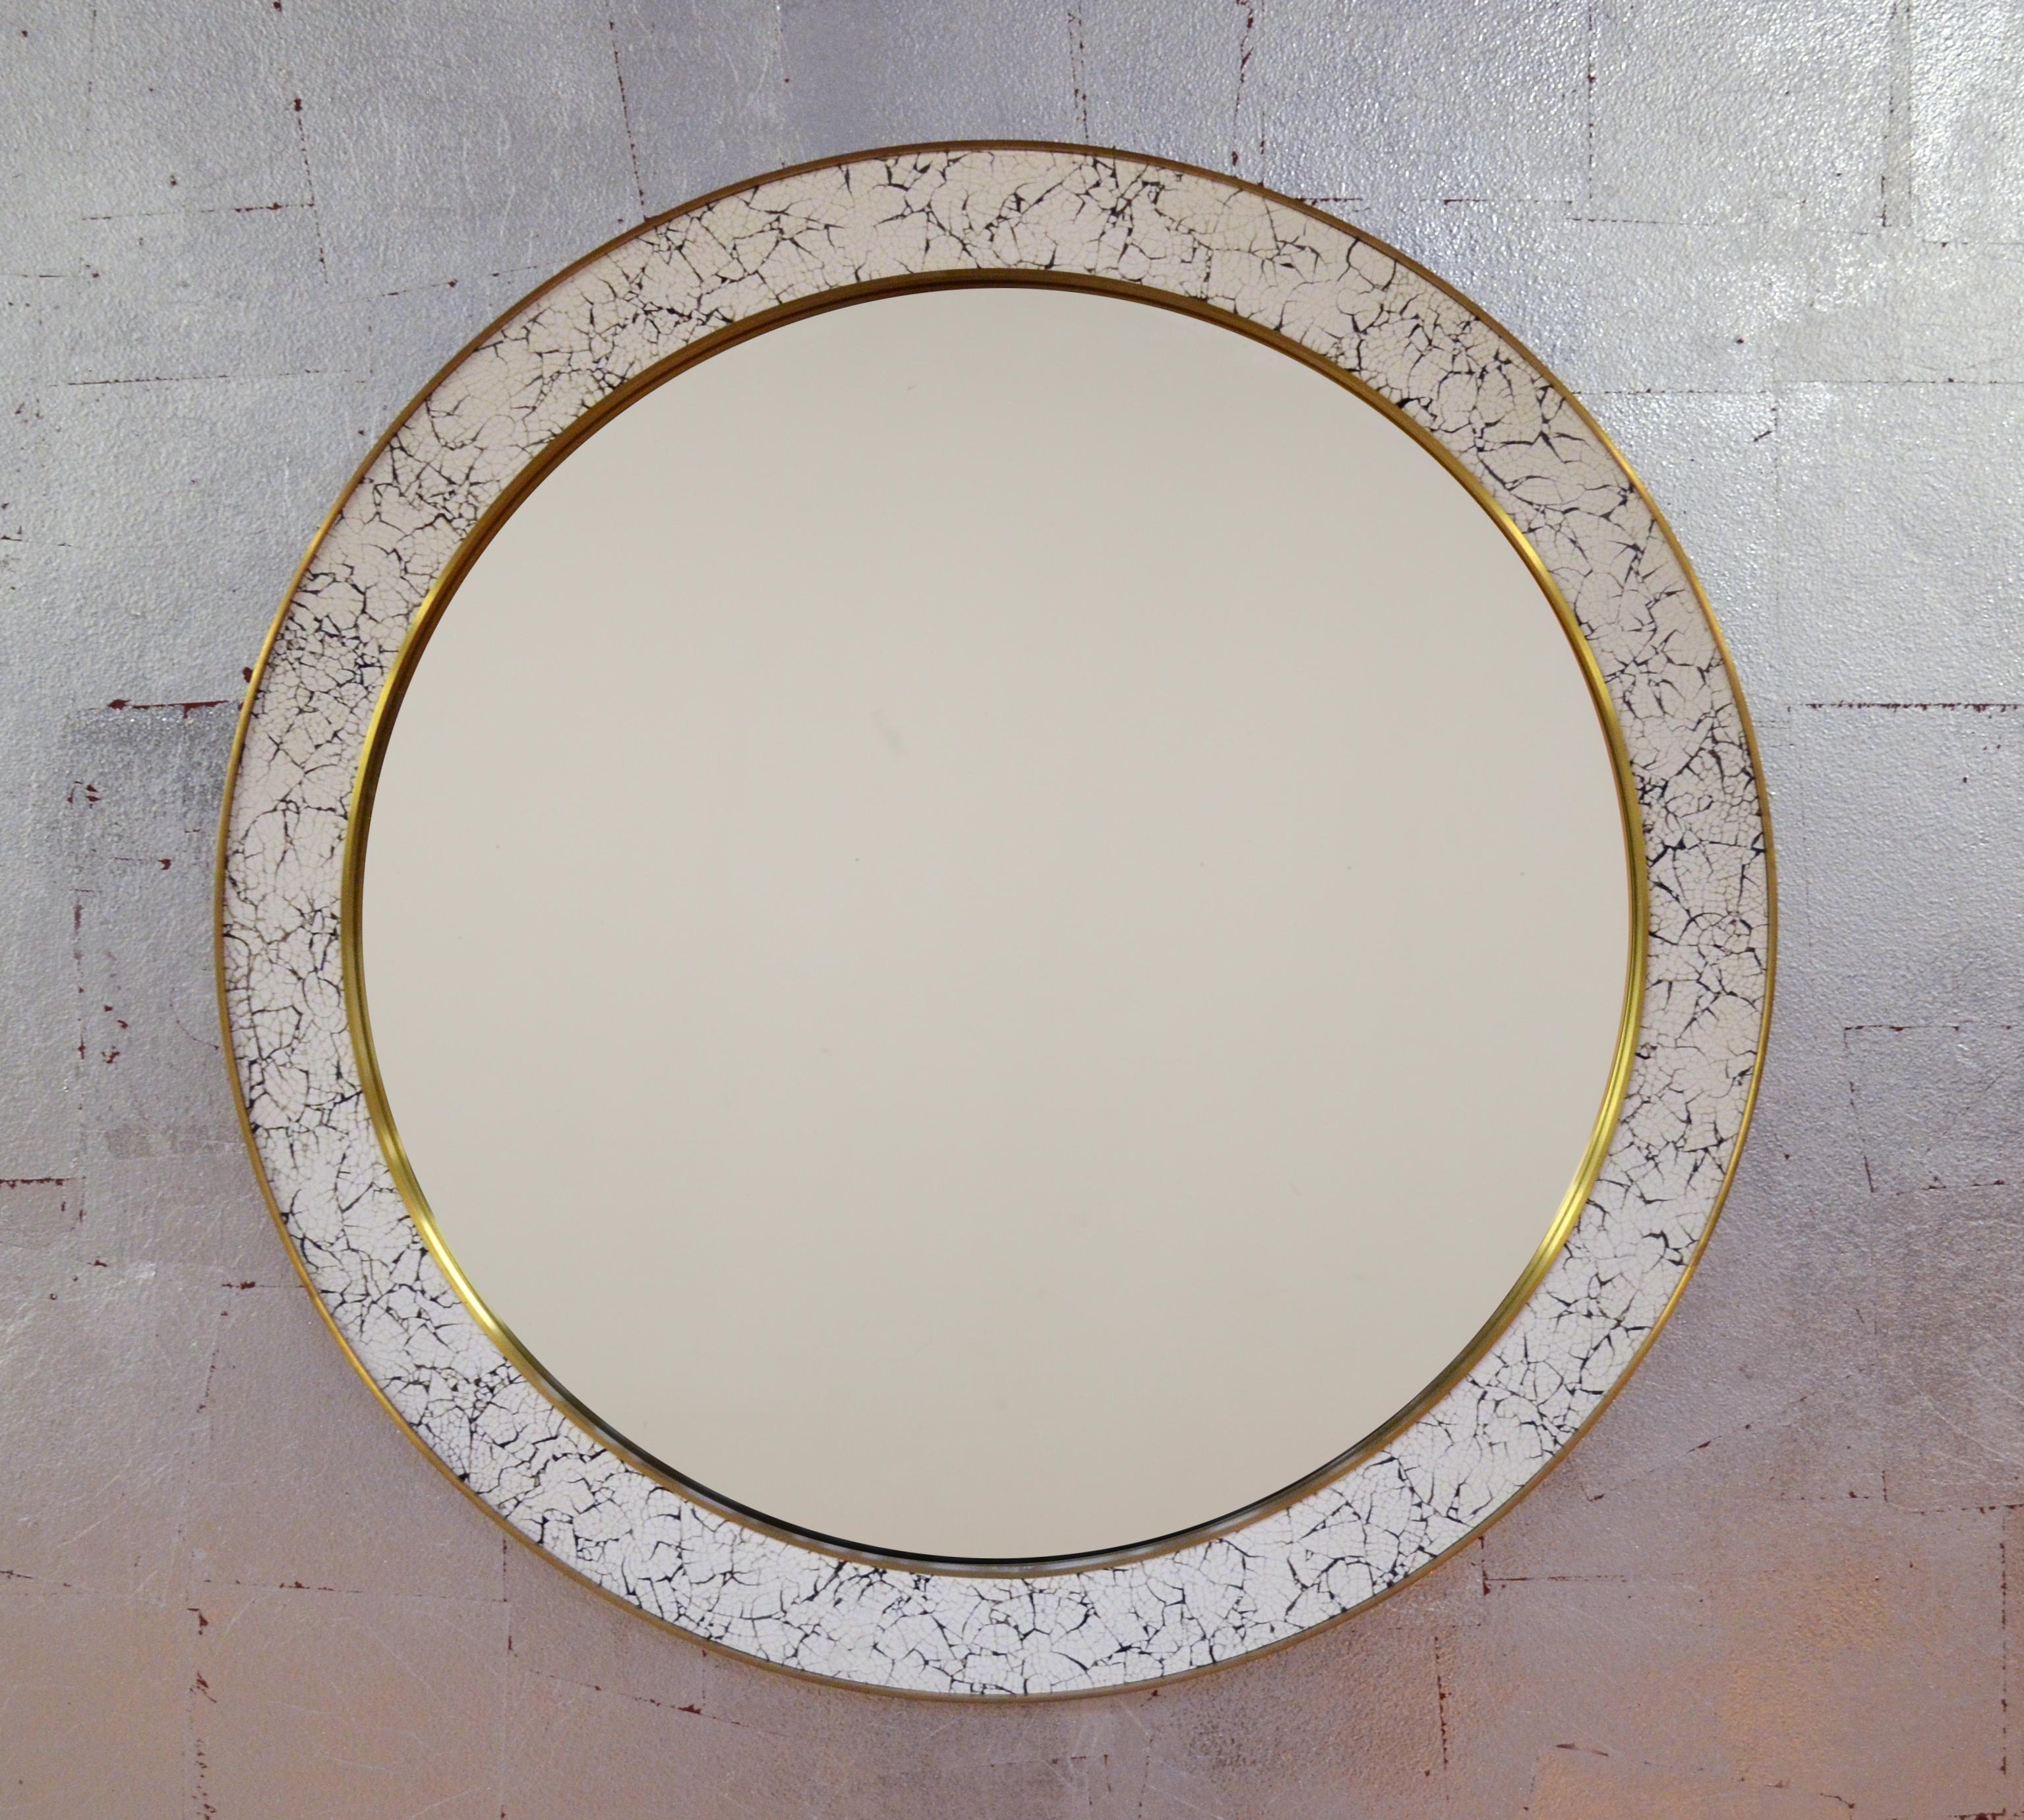 Hand-cracked eggshell and lacquer frame, trimmed in brass or antique bronze. Eglomisé mirror available.
Dimensions: 48